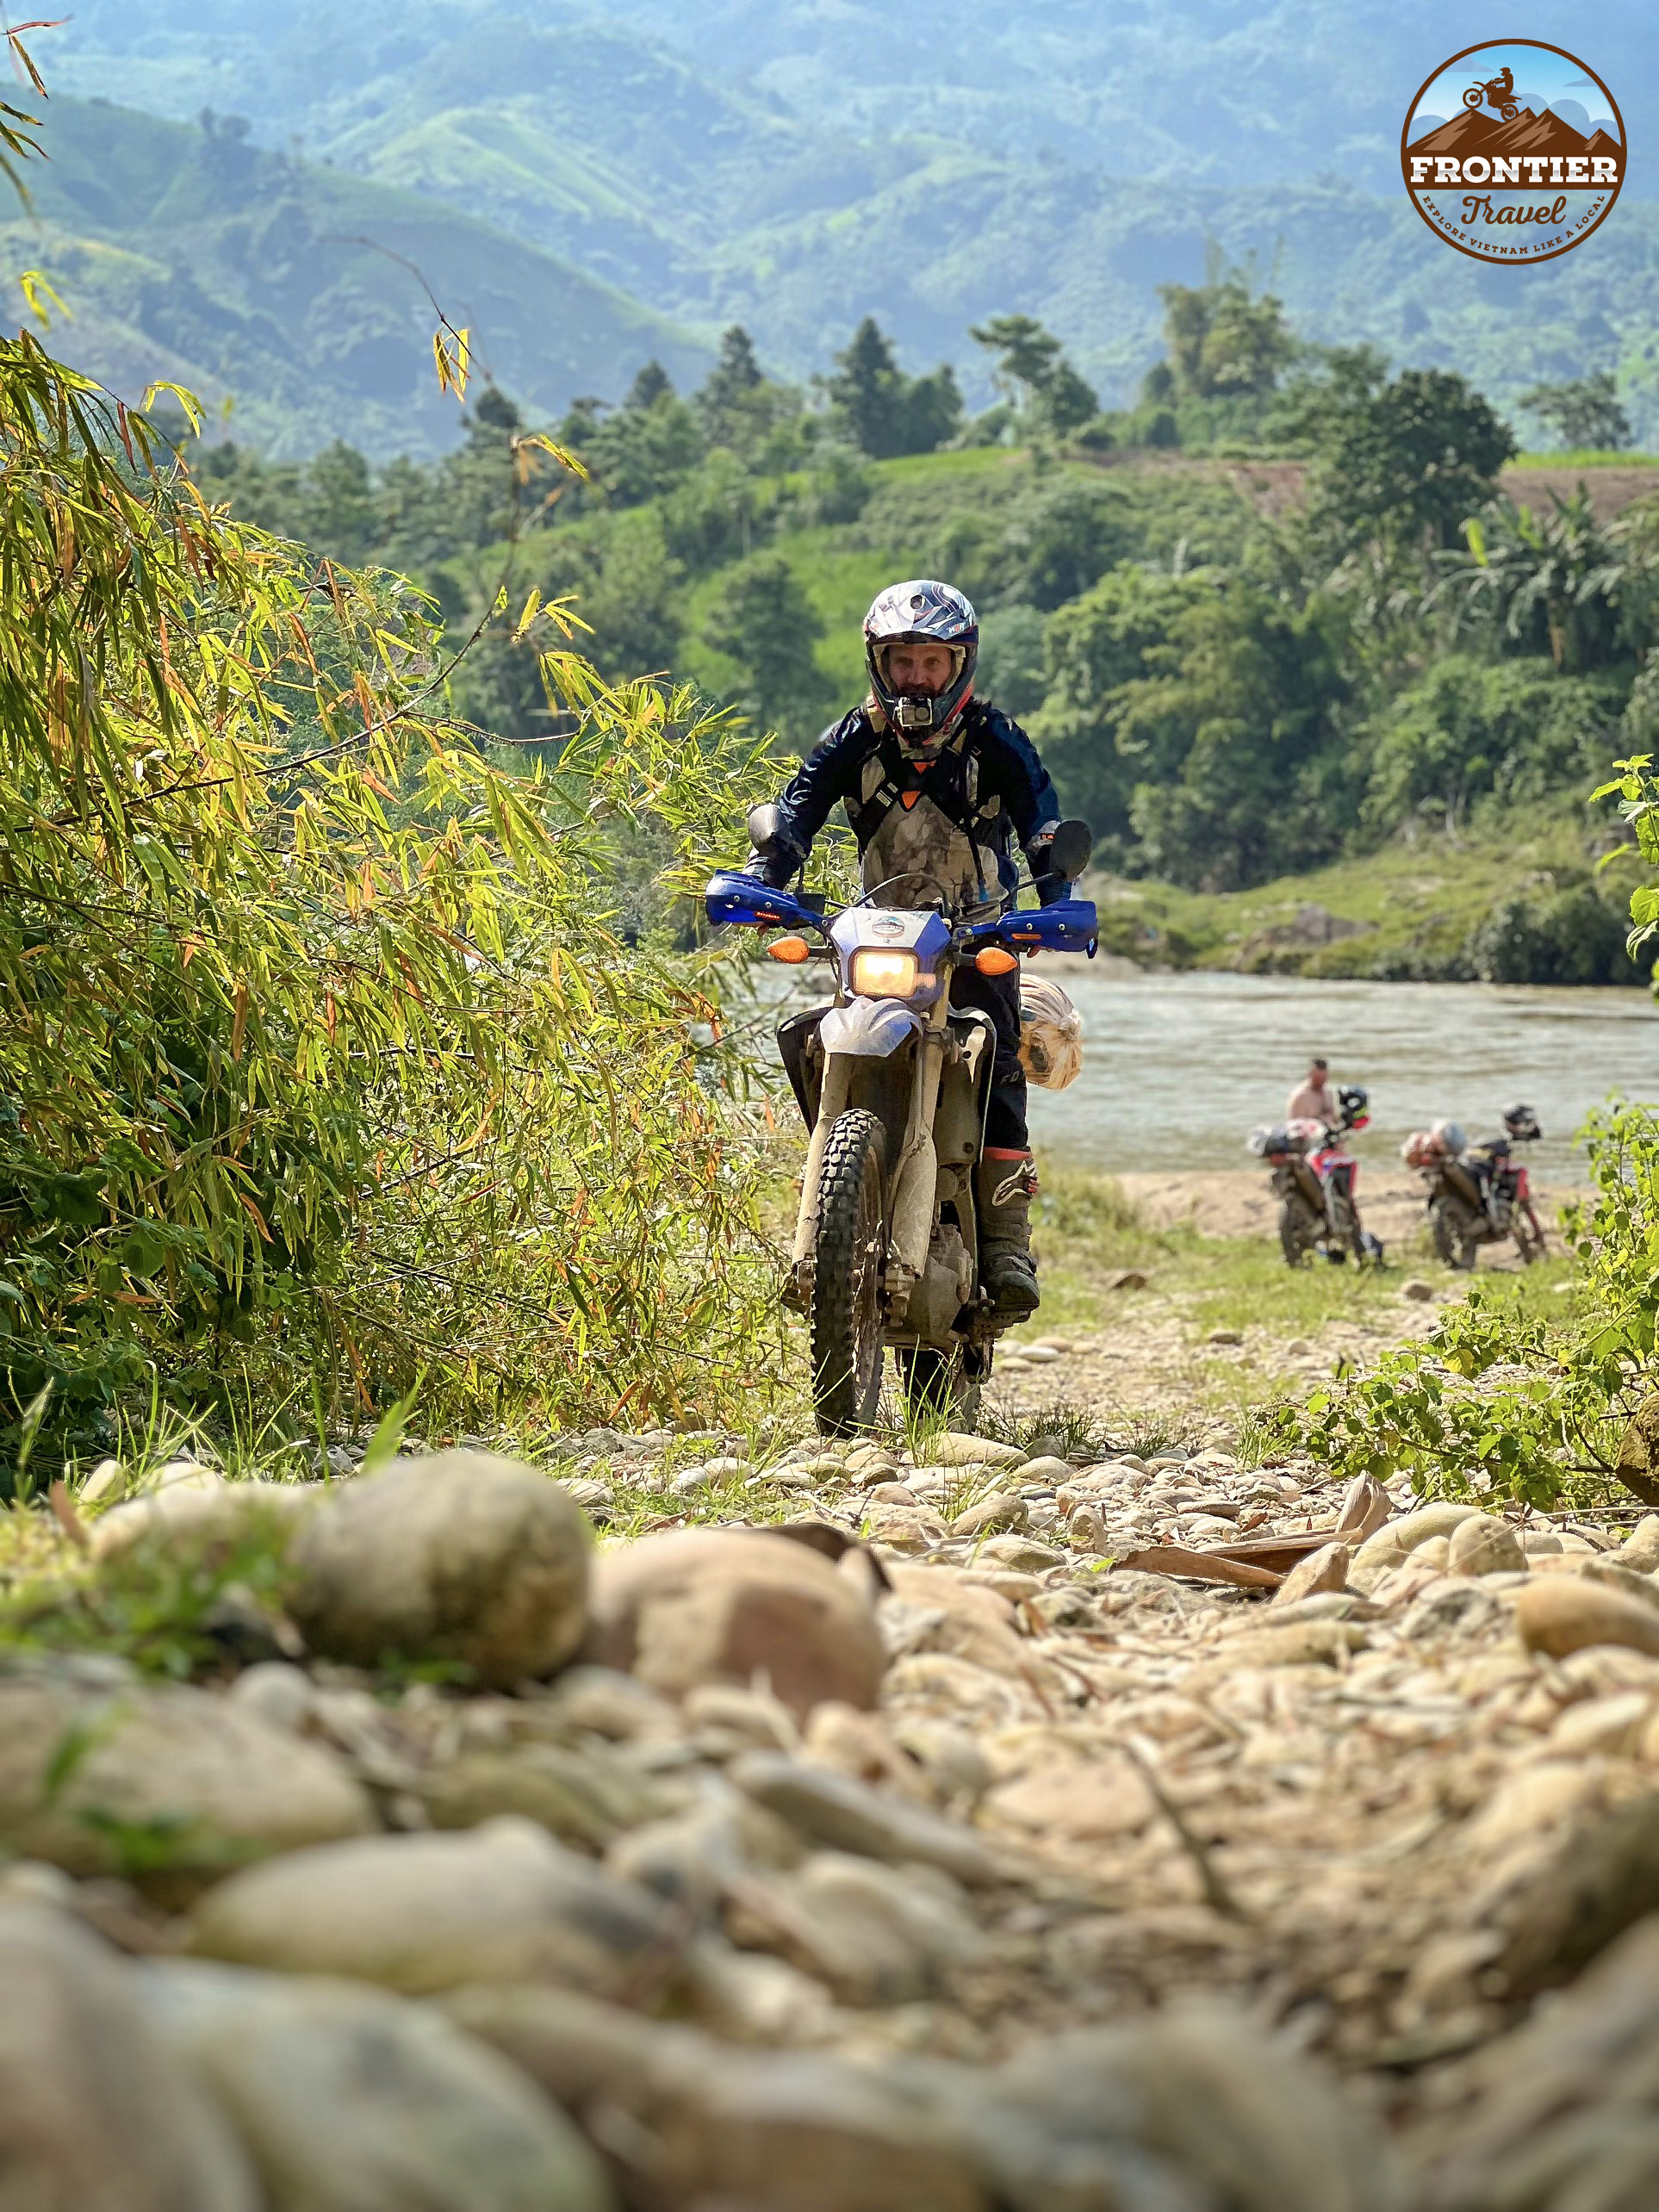 Day 7: HA GIANG – DONG VAN (150KM/APPROX. 6 HOURS) (B/L/D)